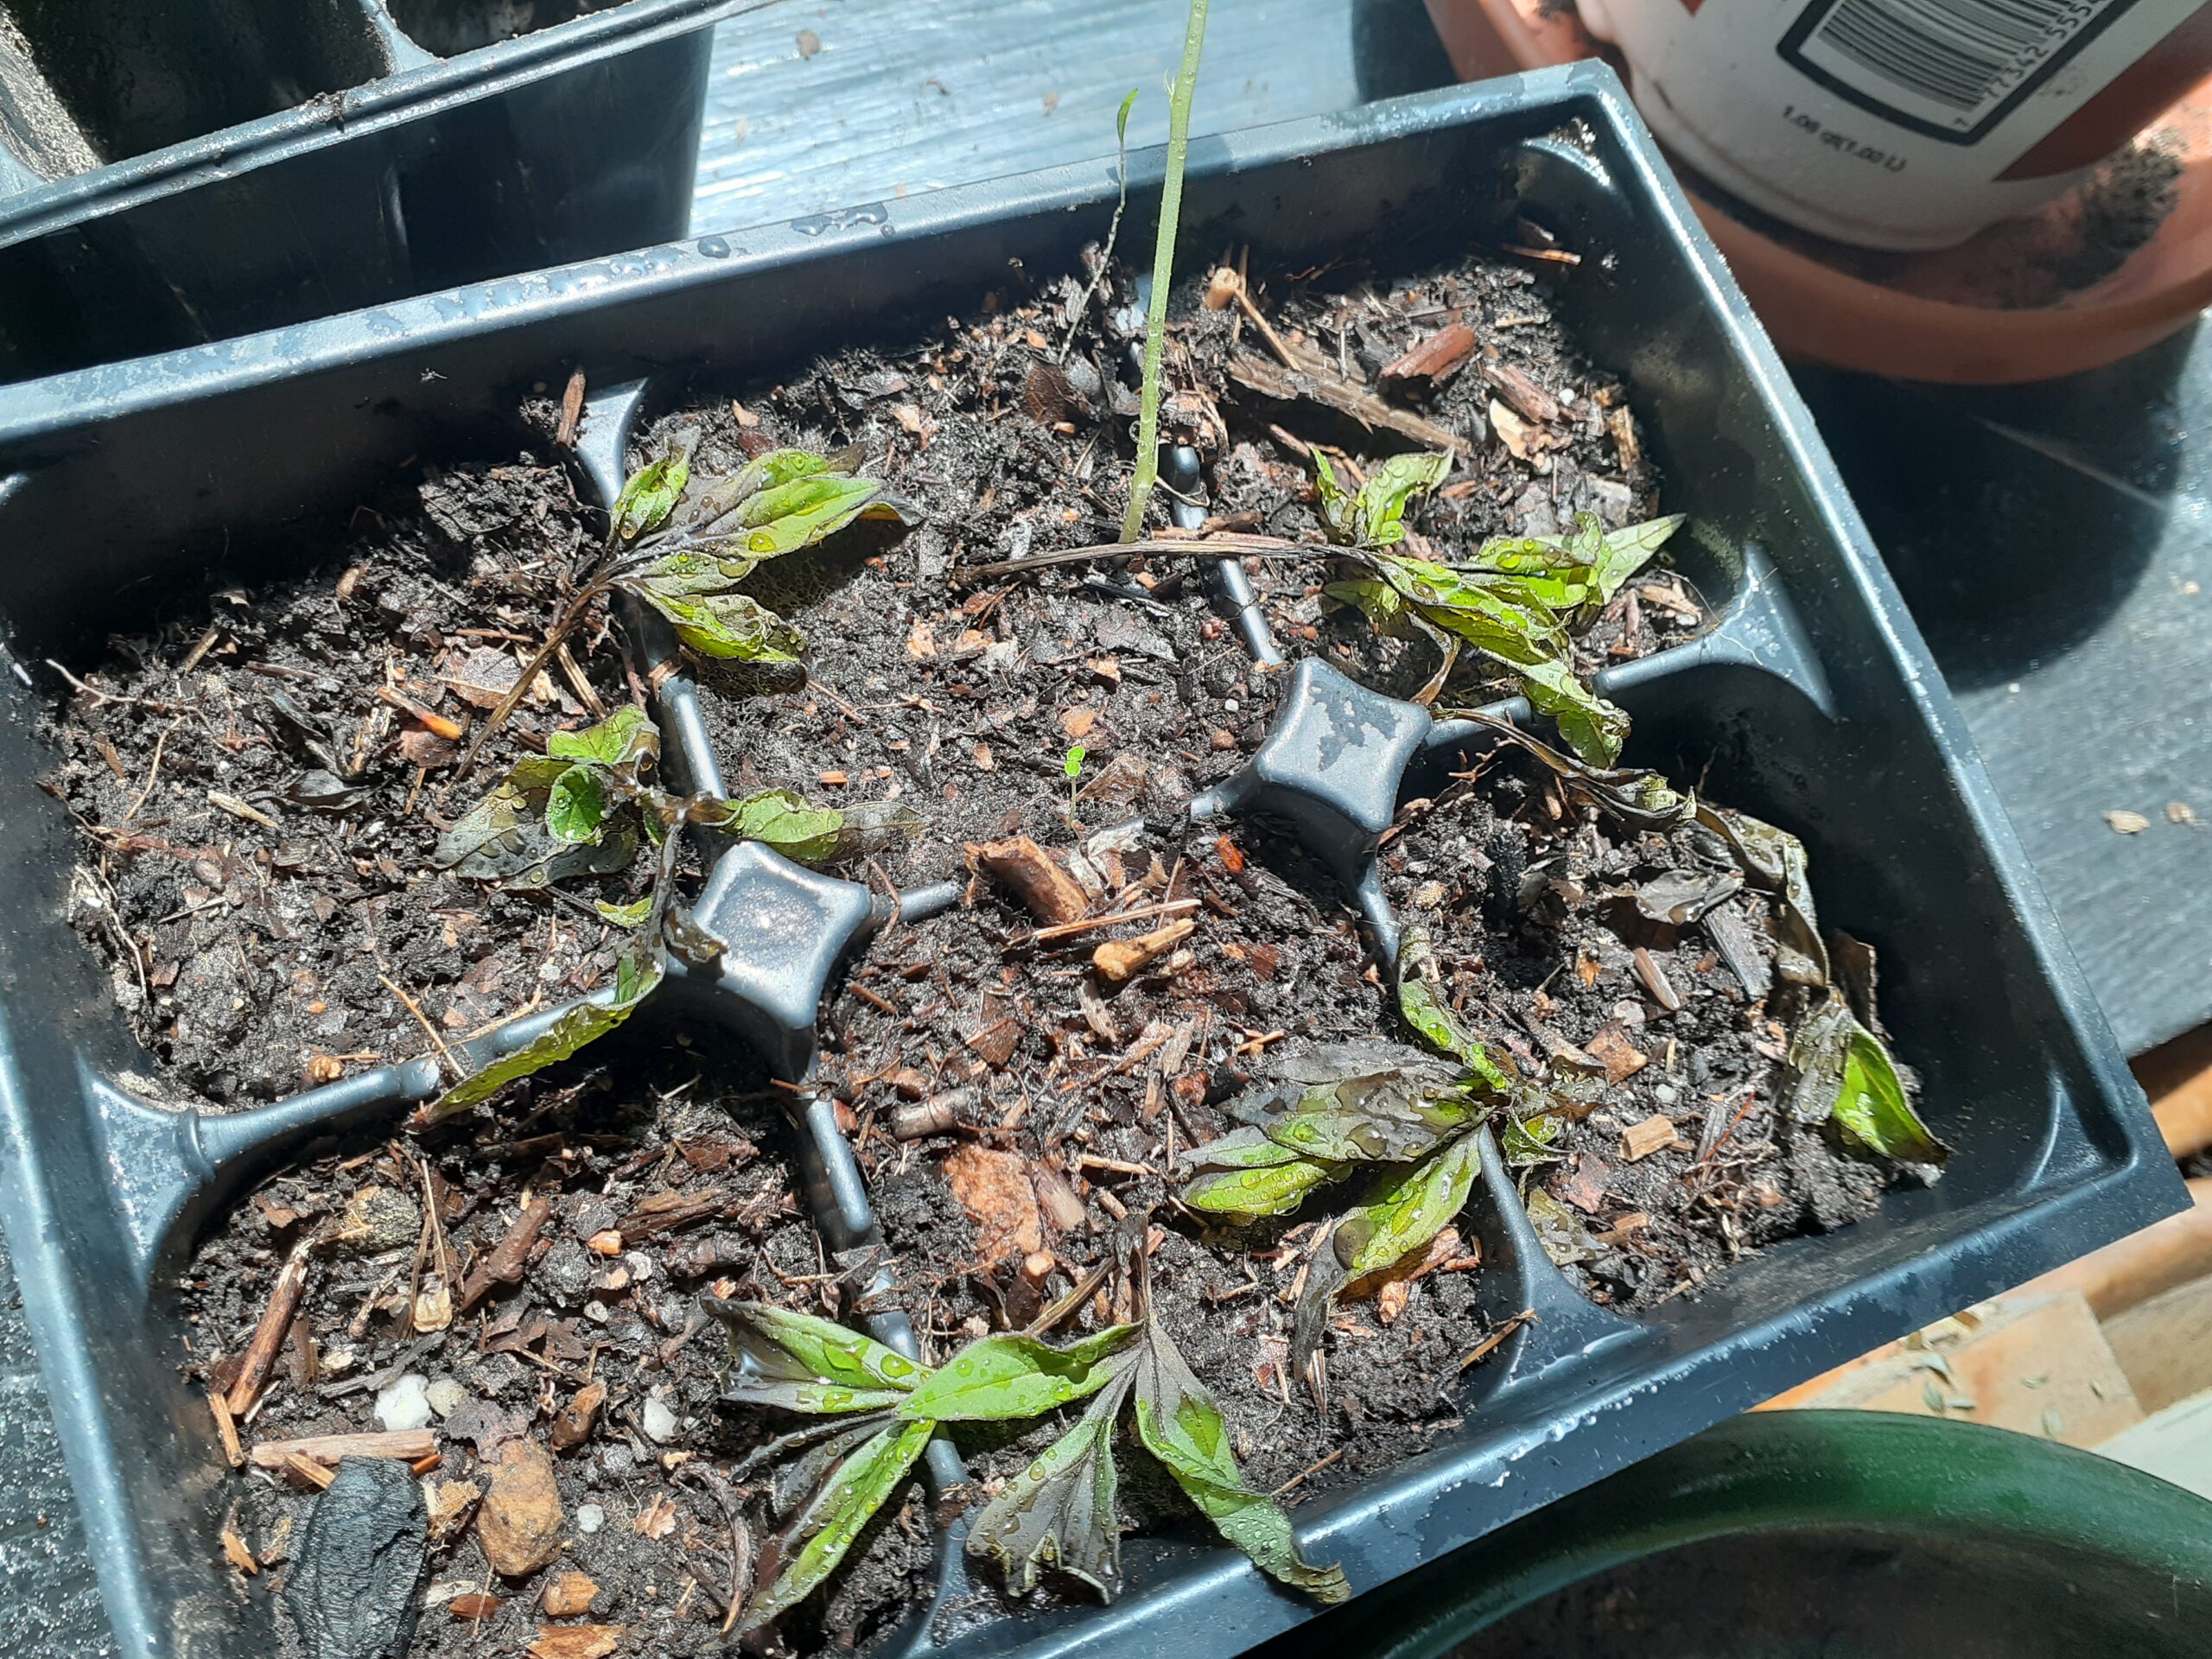 Propagating peonies by cuttings didn’t work